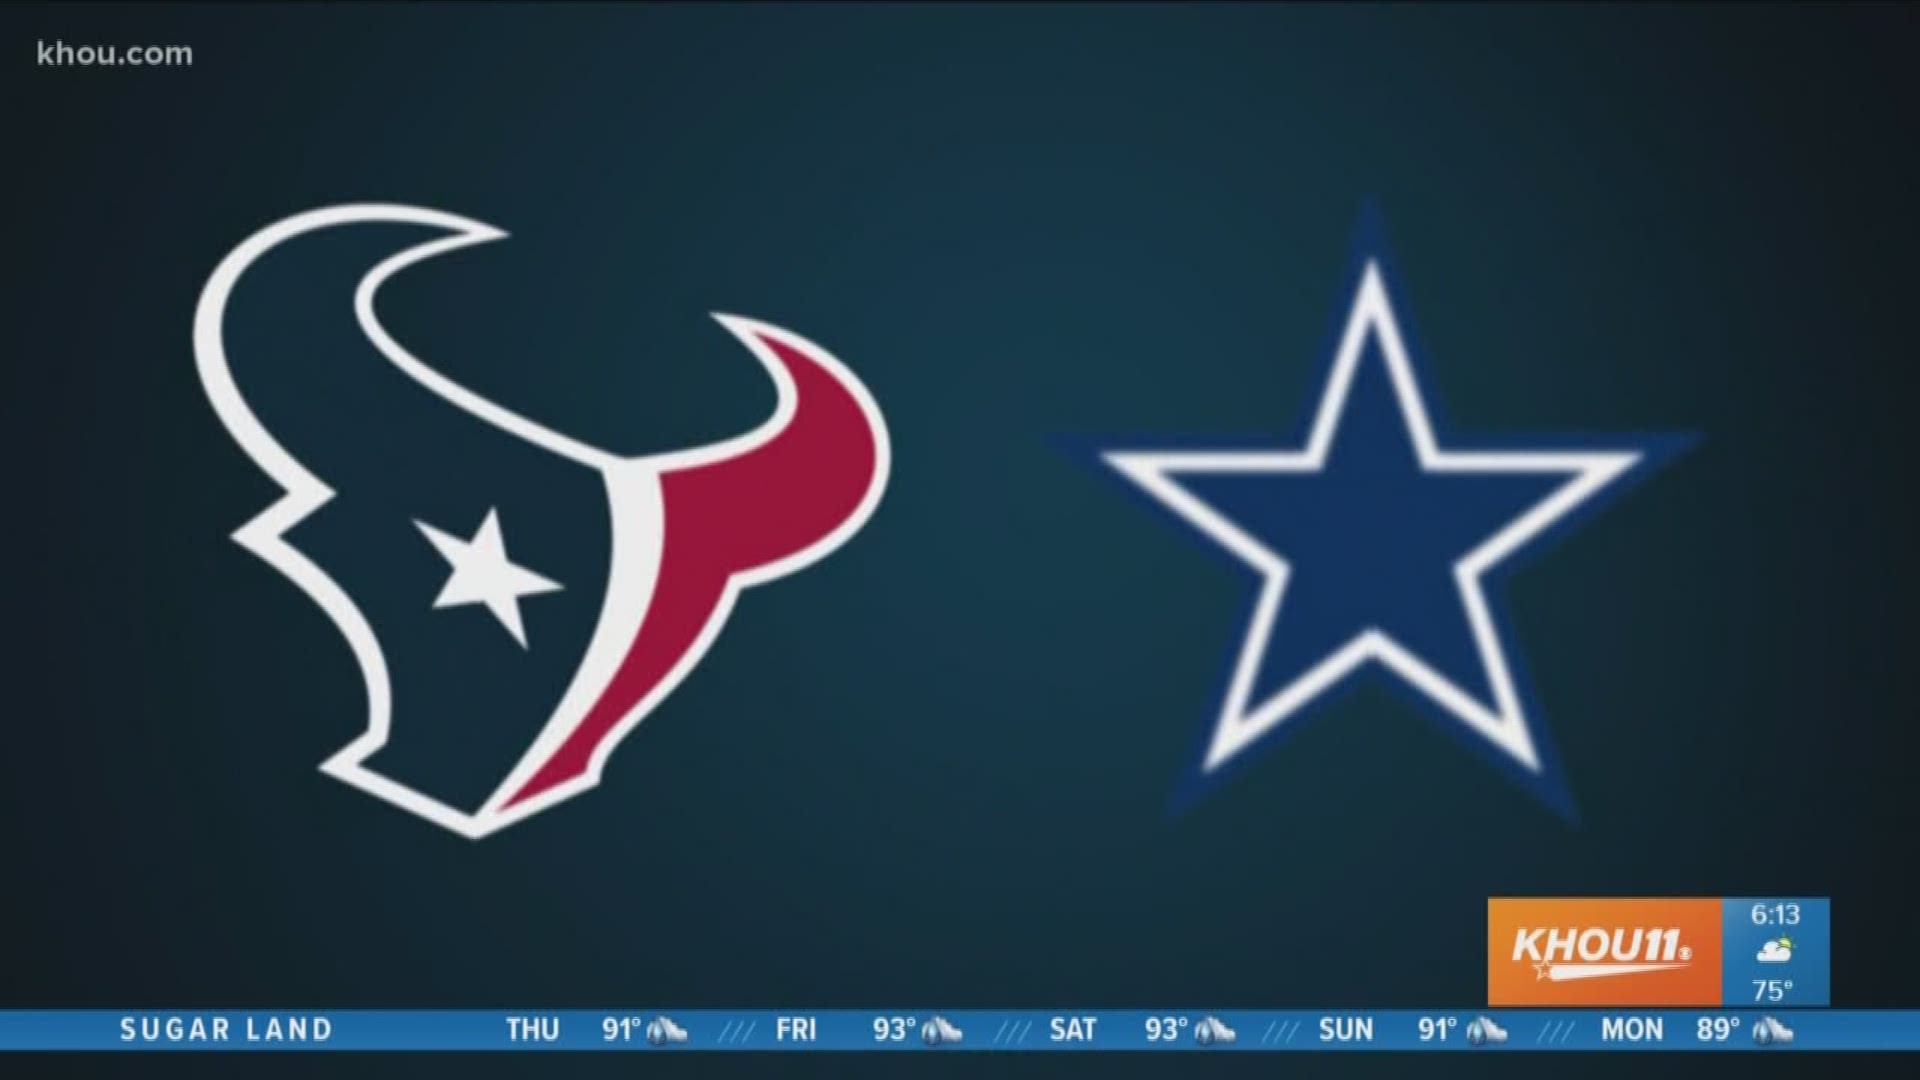 It's a Texas-sized showdown as the Texans take on the Cowboys Thursday night at NRG Stadium. Brandi Smith broke down the long-standing rivalry between the two cities.